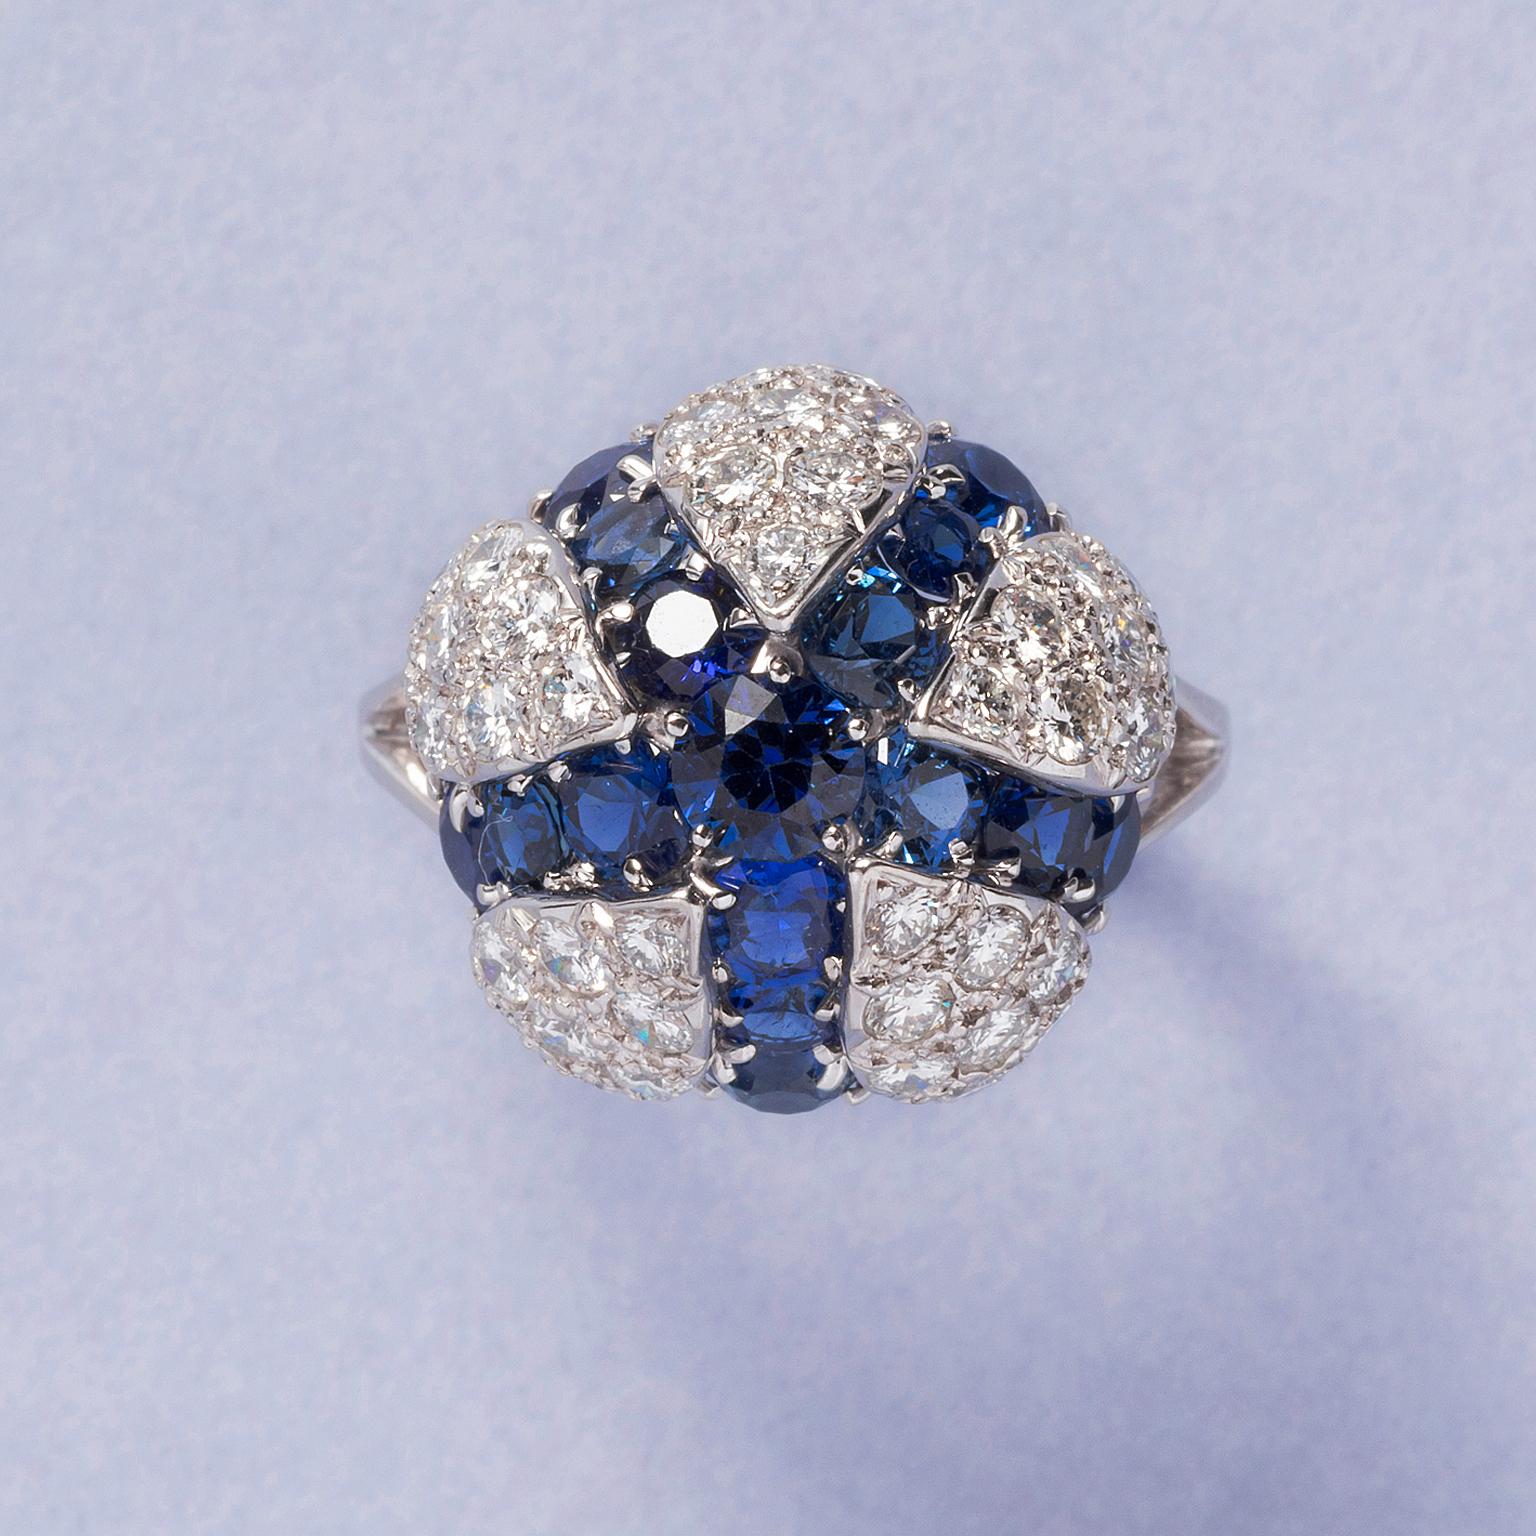 A platinum ring with a large open flower or coral anemone pavé set brilliant cut diamonds (app. 1.5 carat G-H, VS in total) with a star of brilliant cut sapphires (app. 4.95 carat in total) in between, signed: Cartier and numbered, circa